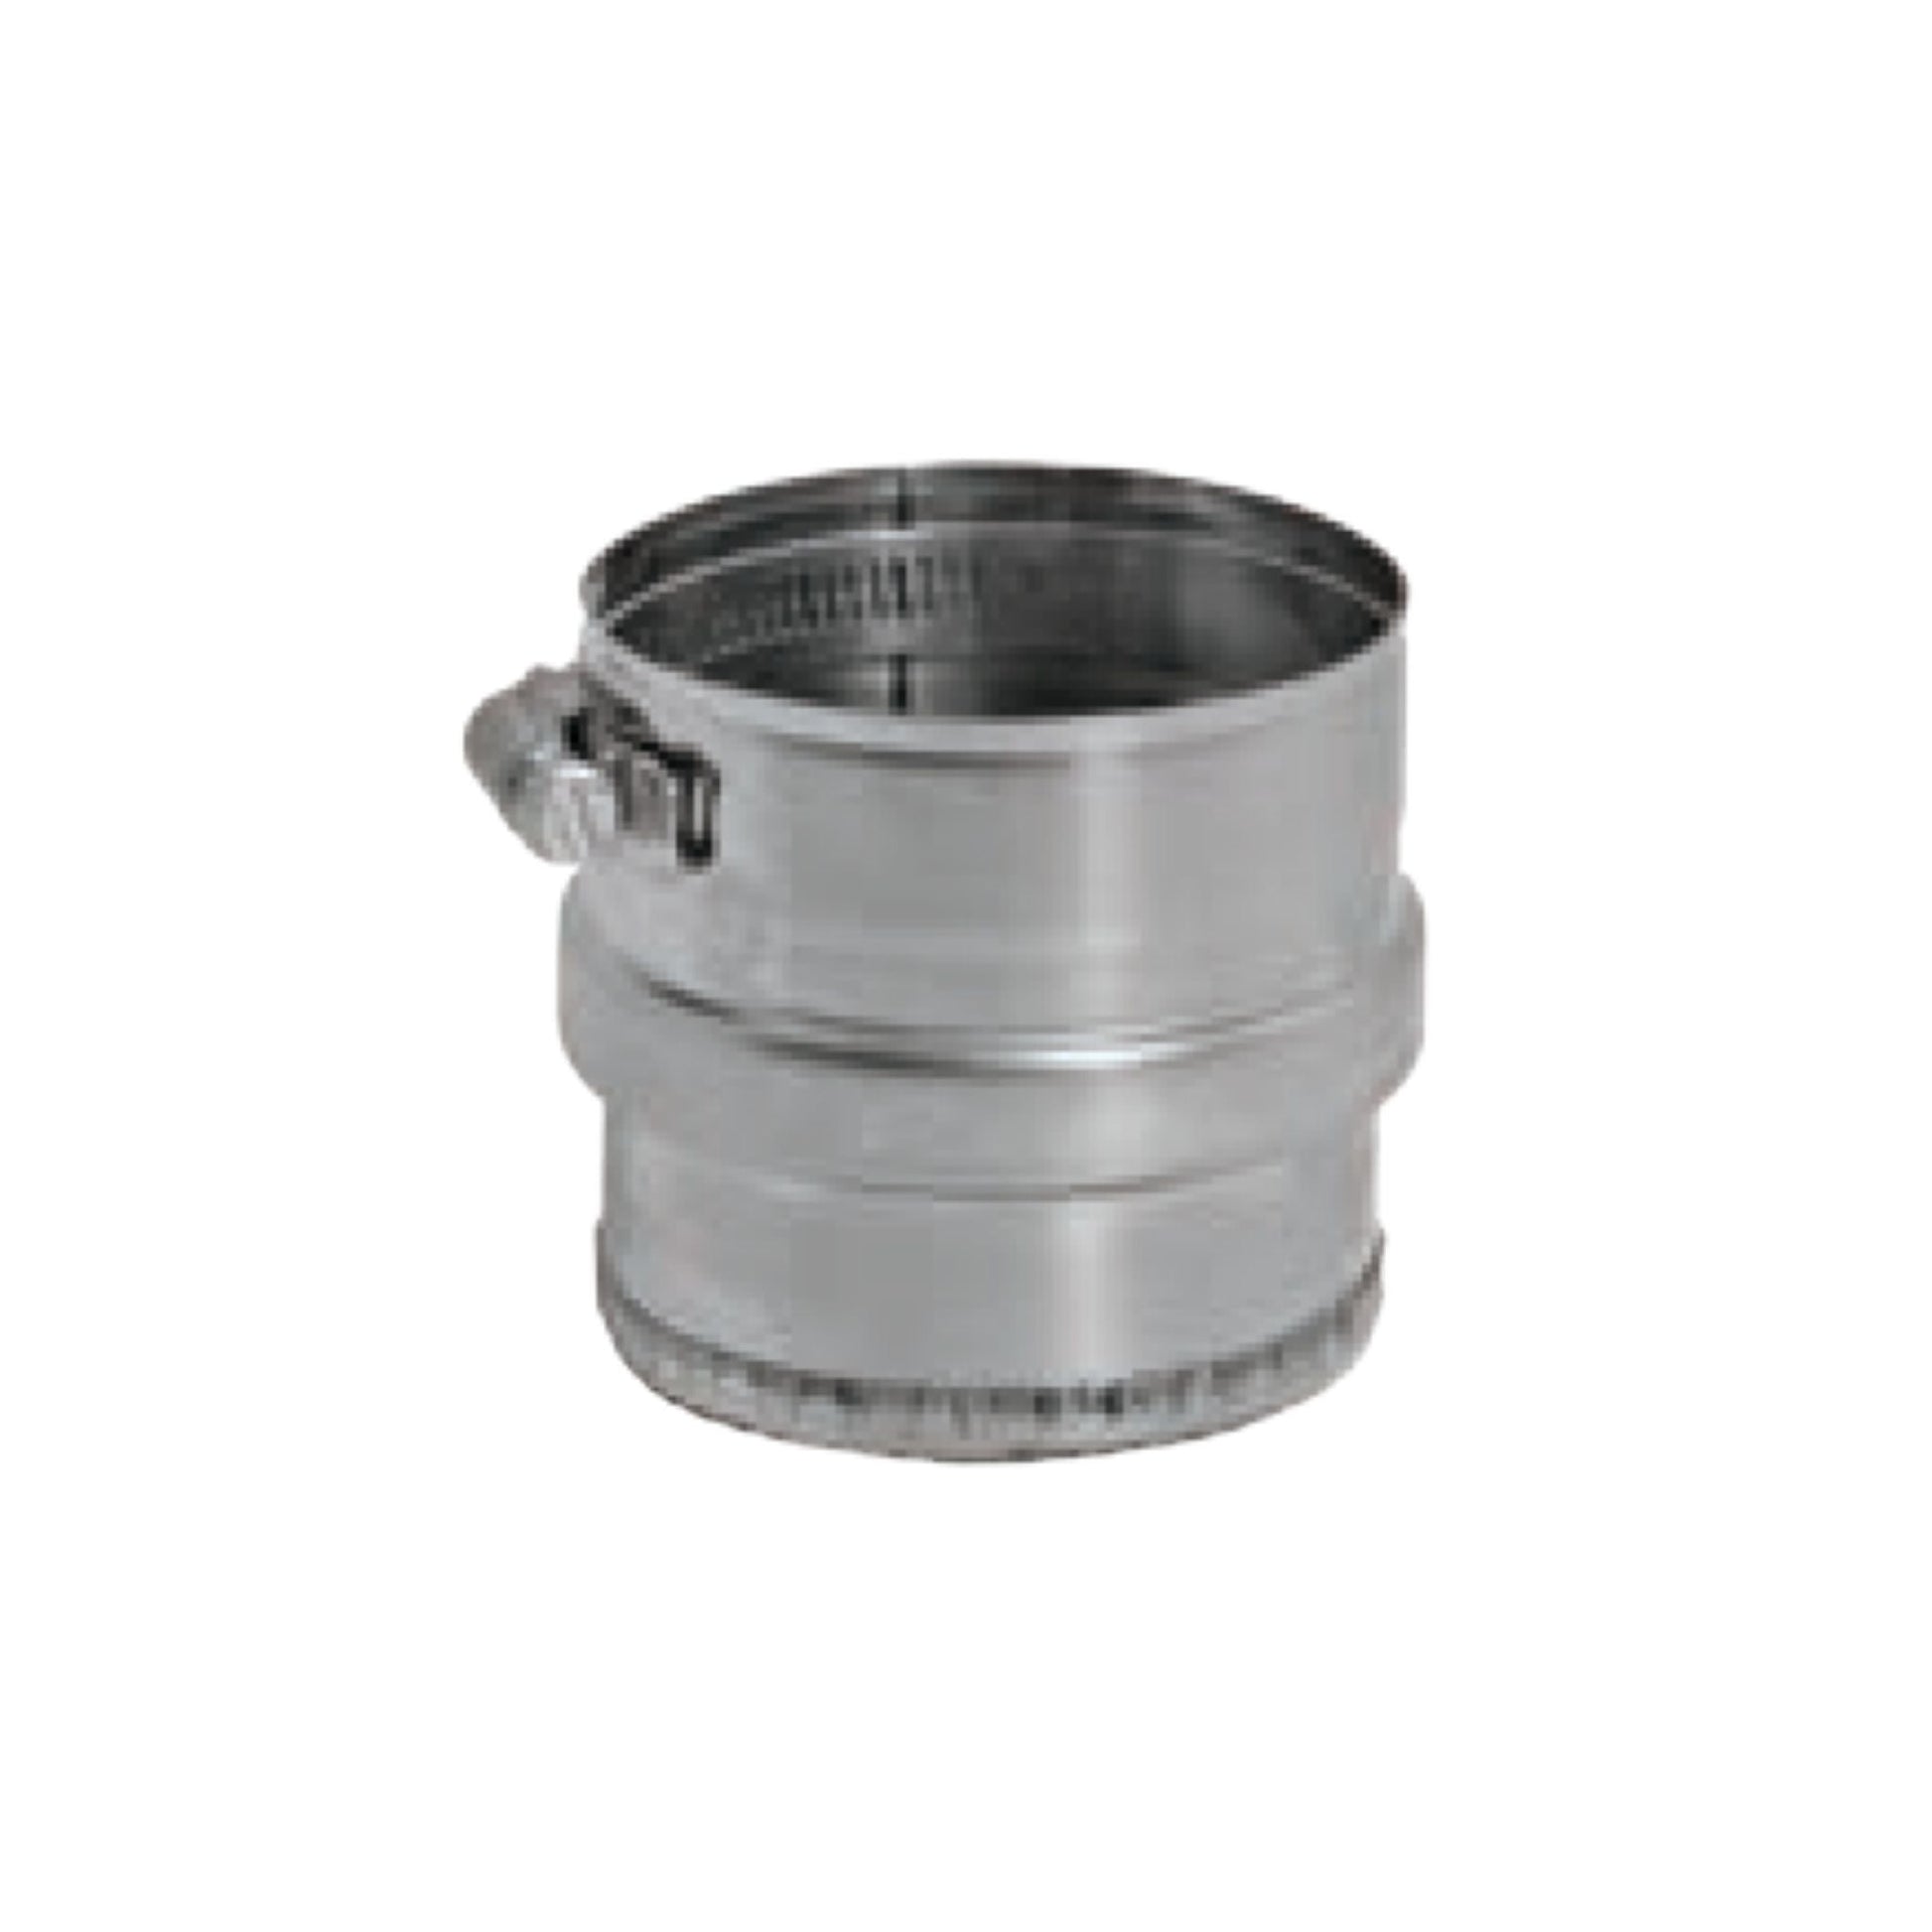 DuraVent FasNSeal 5" 316L Stainless Steel Tee Cap